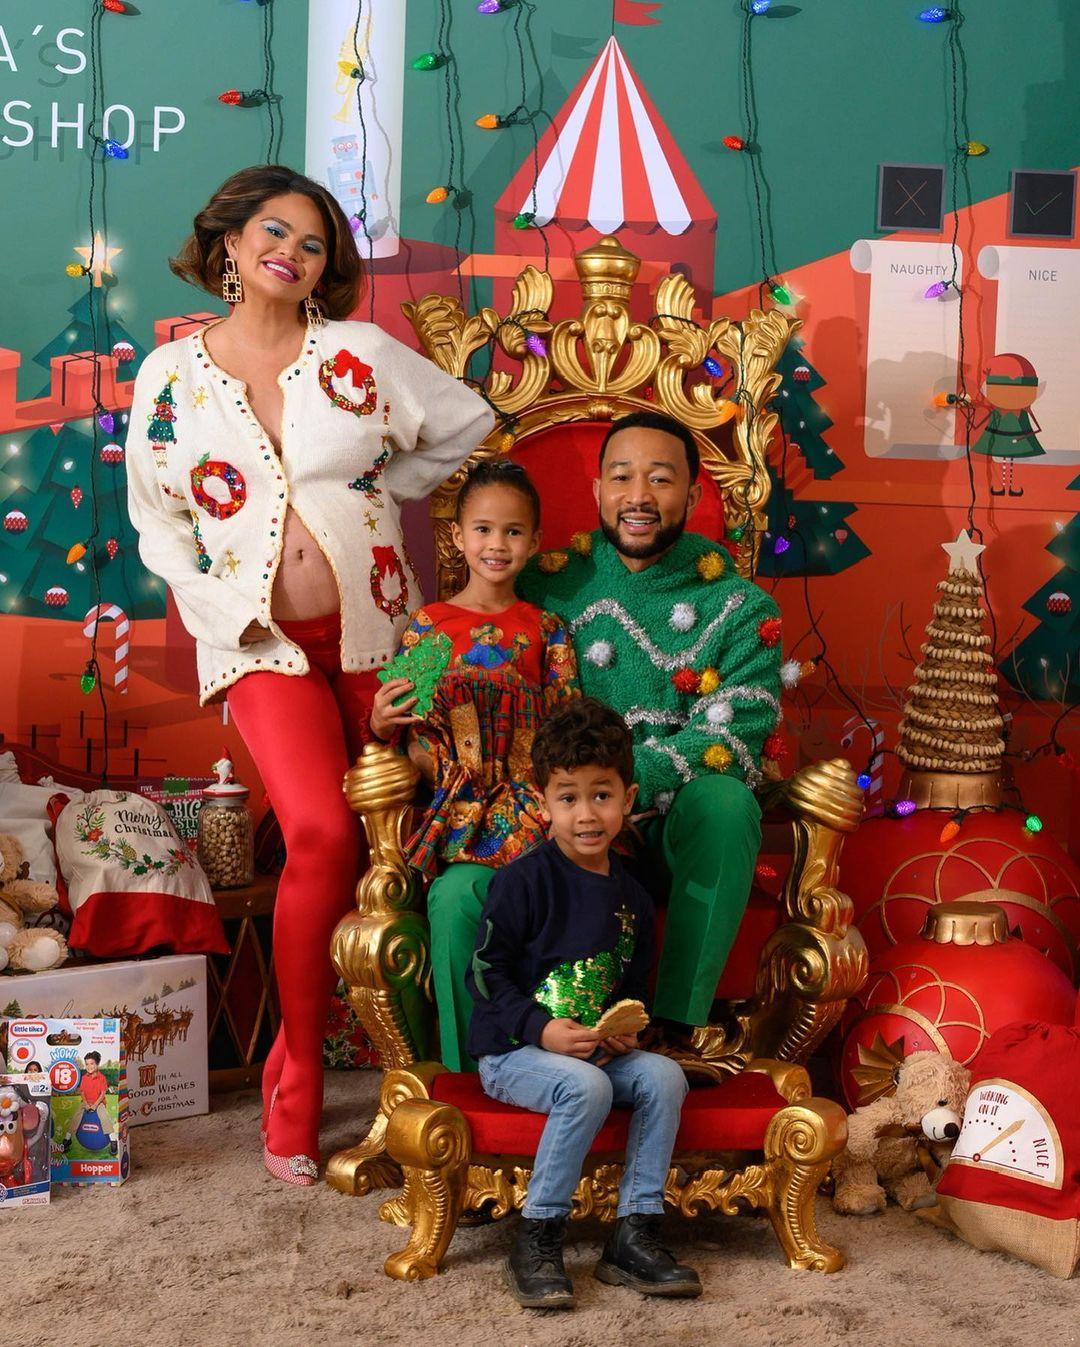 Chrissy Teigen Share Adorable Family Photo From Their Christmas Party